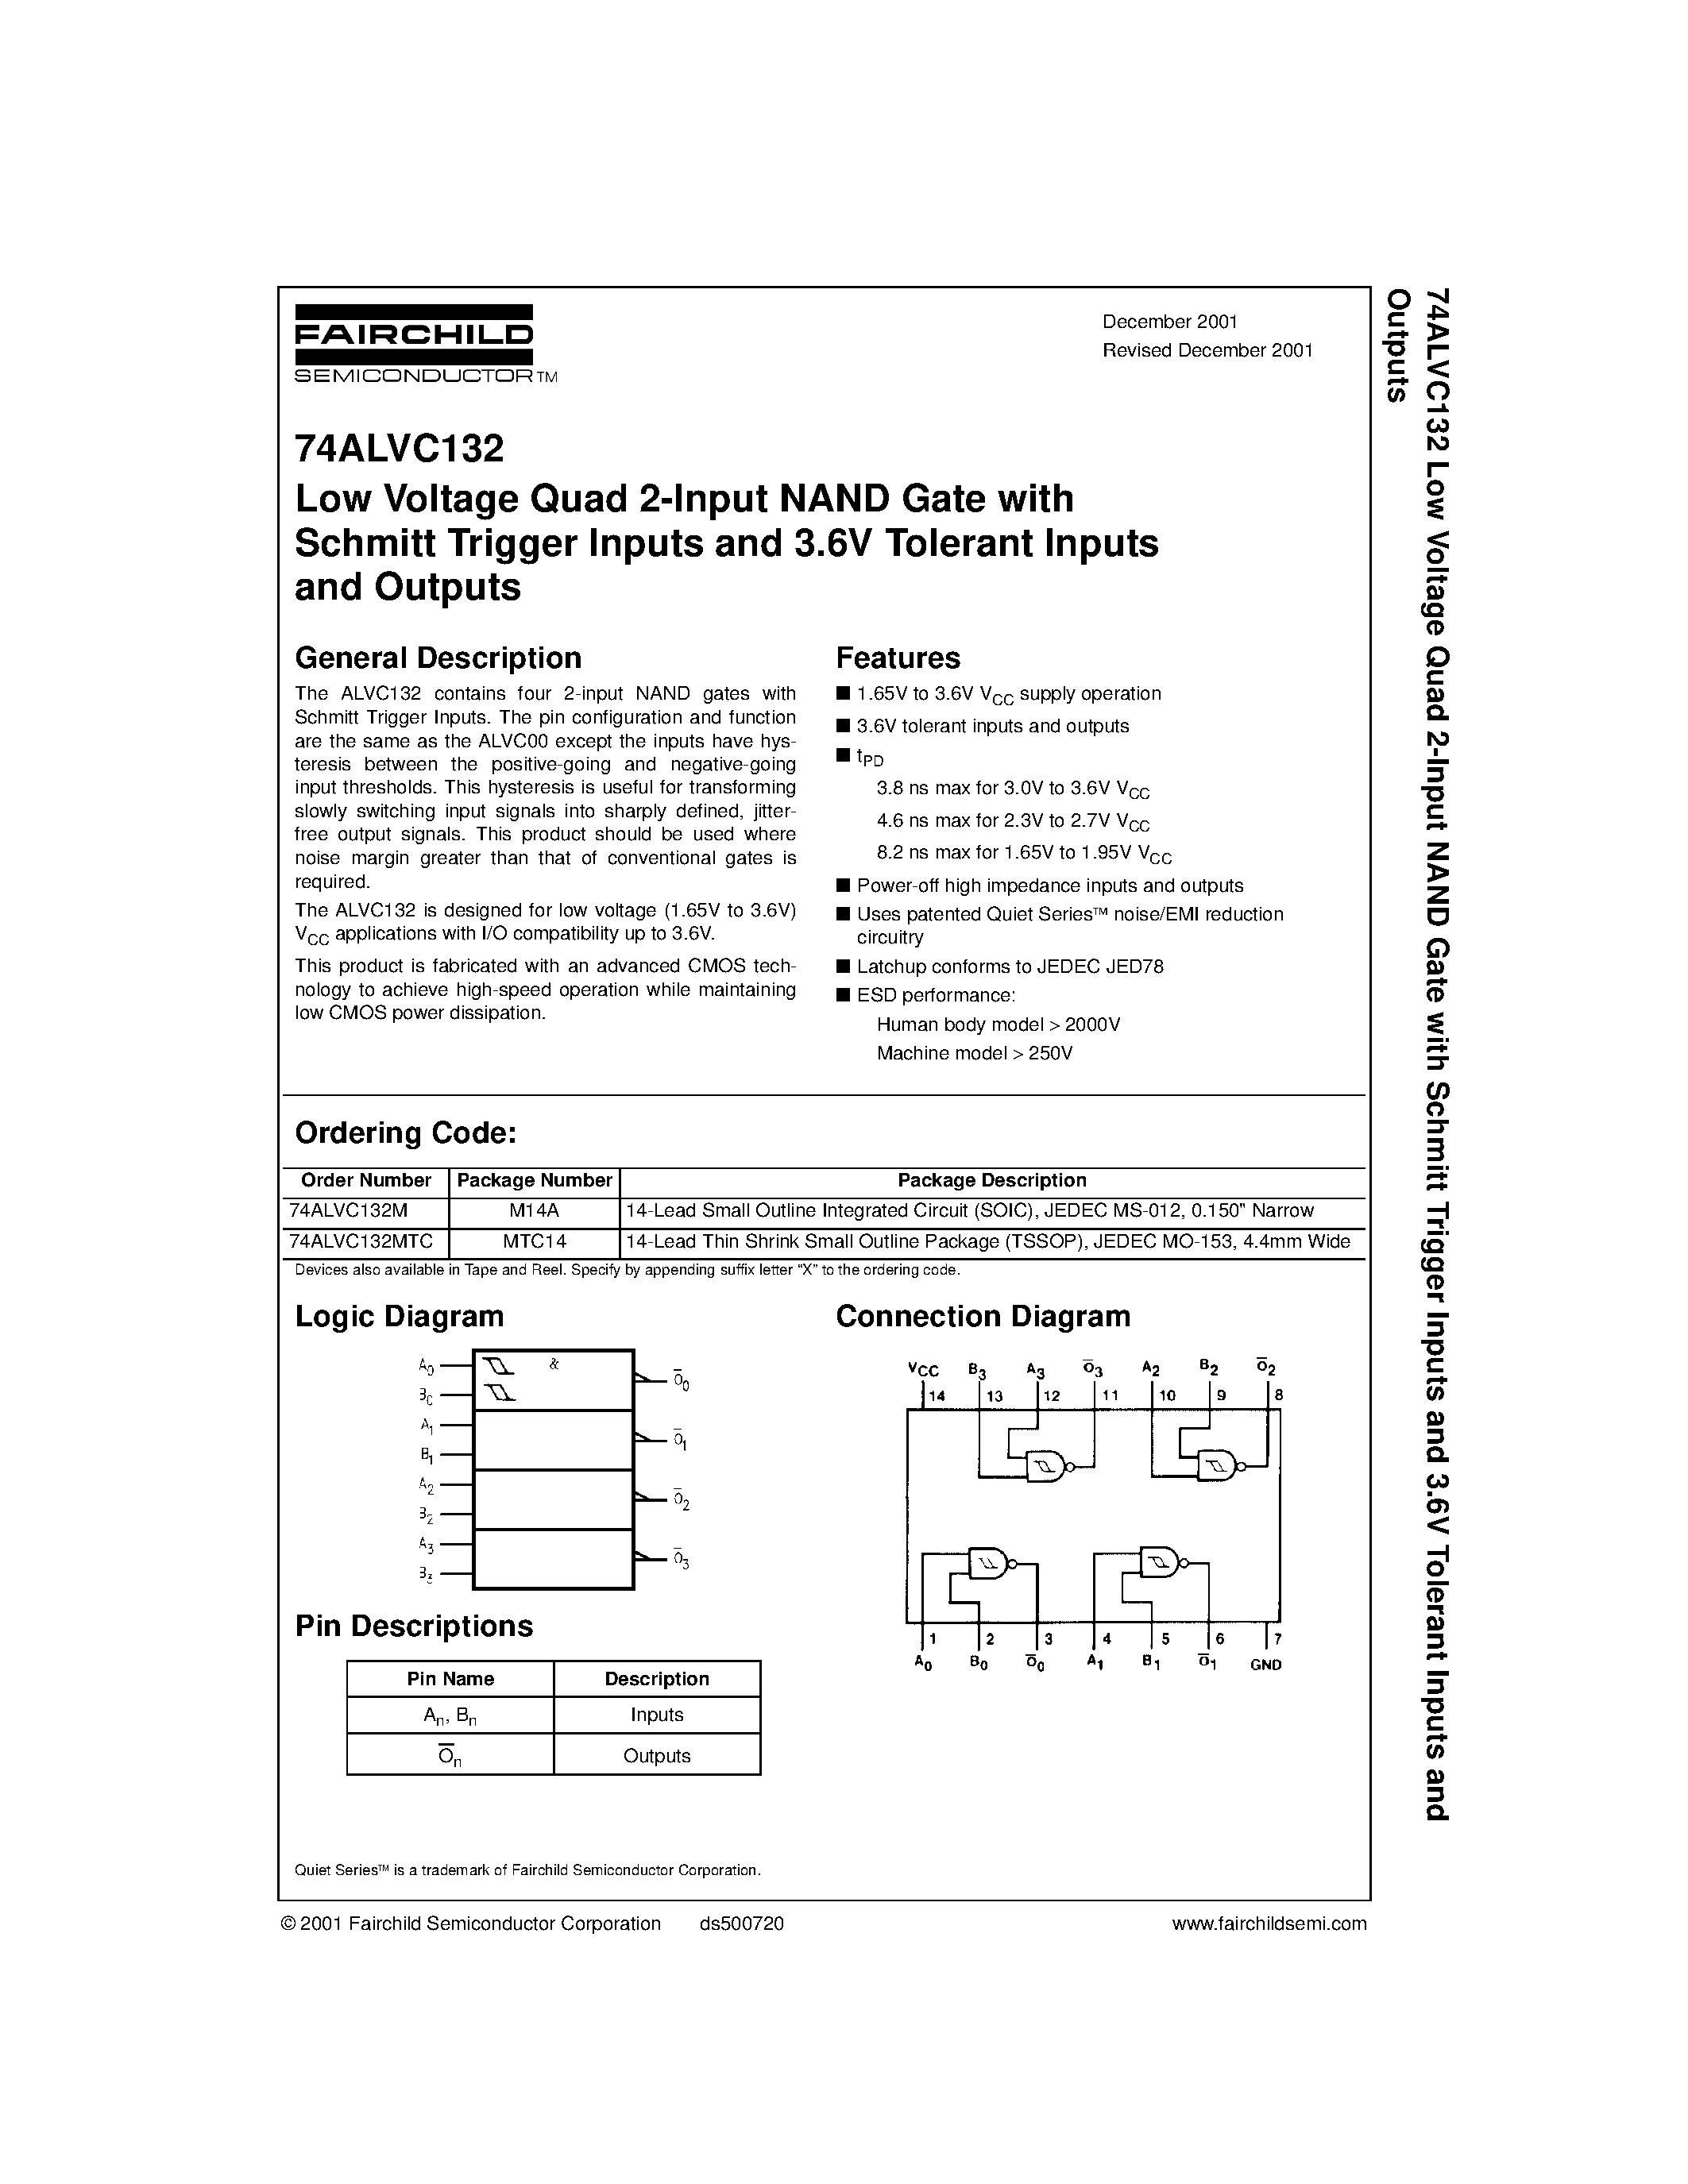 Datasheet 74ALVC132 - Low Voltage Quad 2-Input NAND Gate with Schmitt Trigger Inputs and 3.6V Tolerant Inputs and Outputs page 1